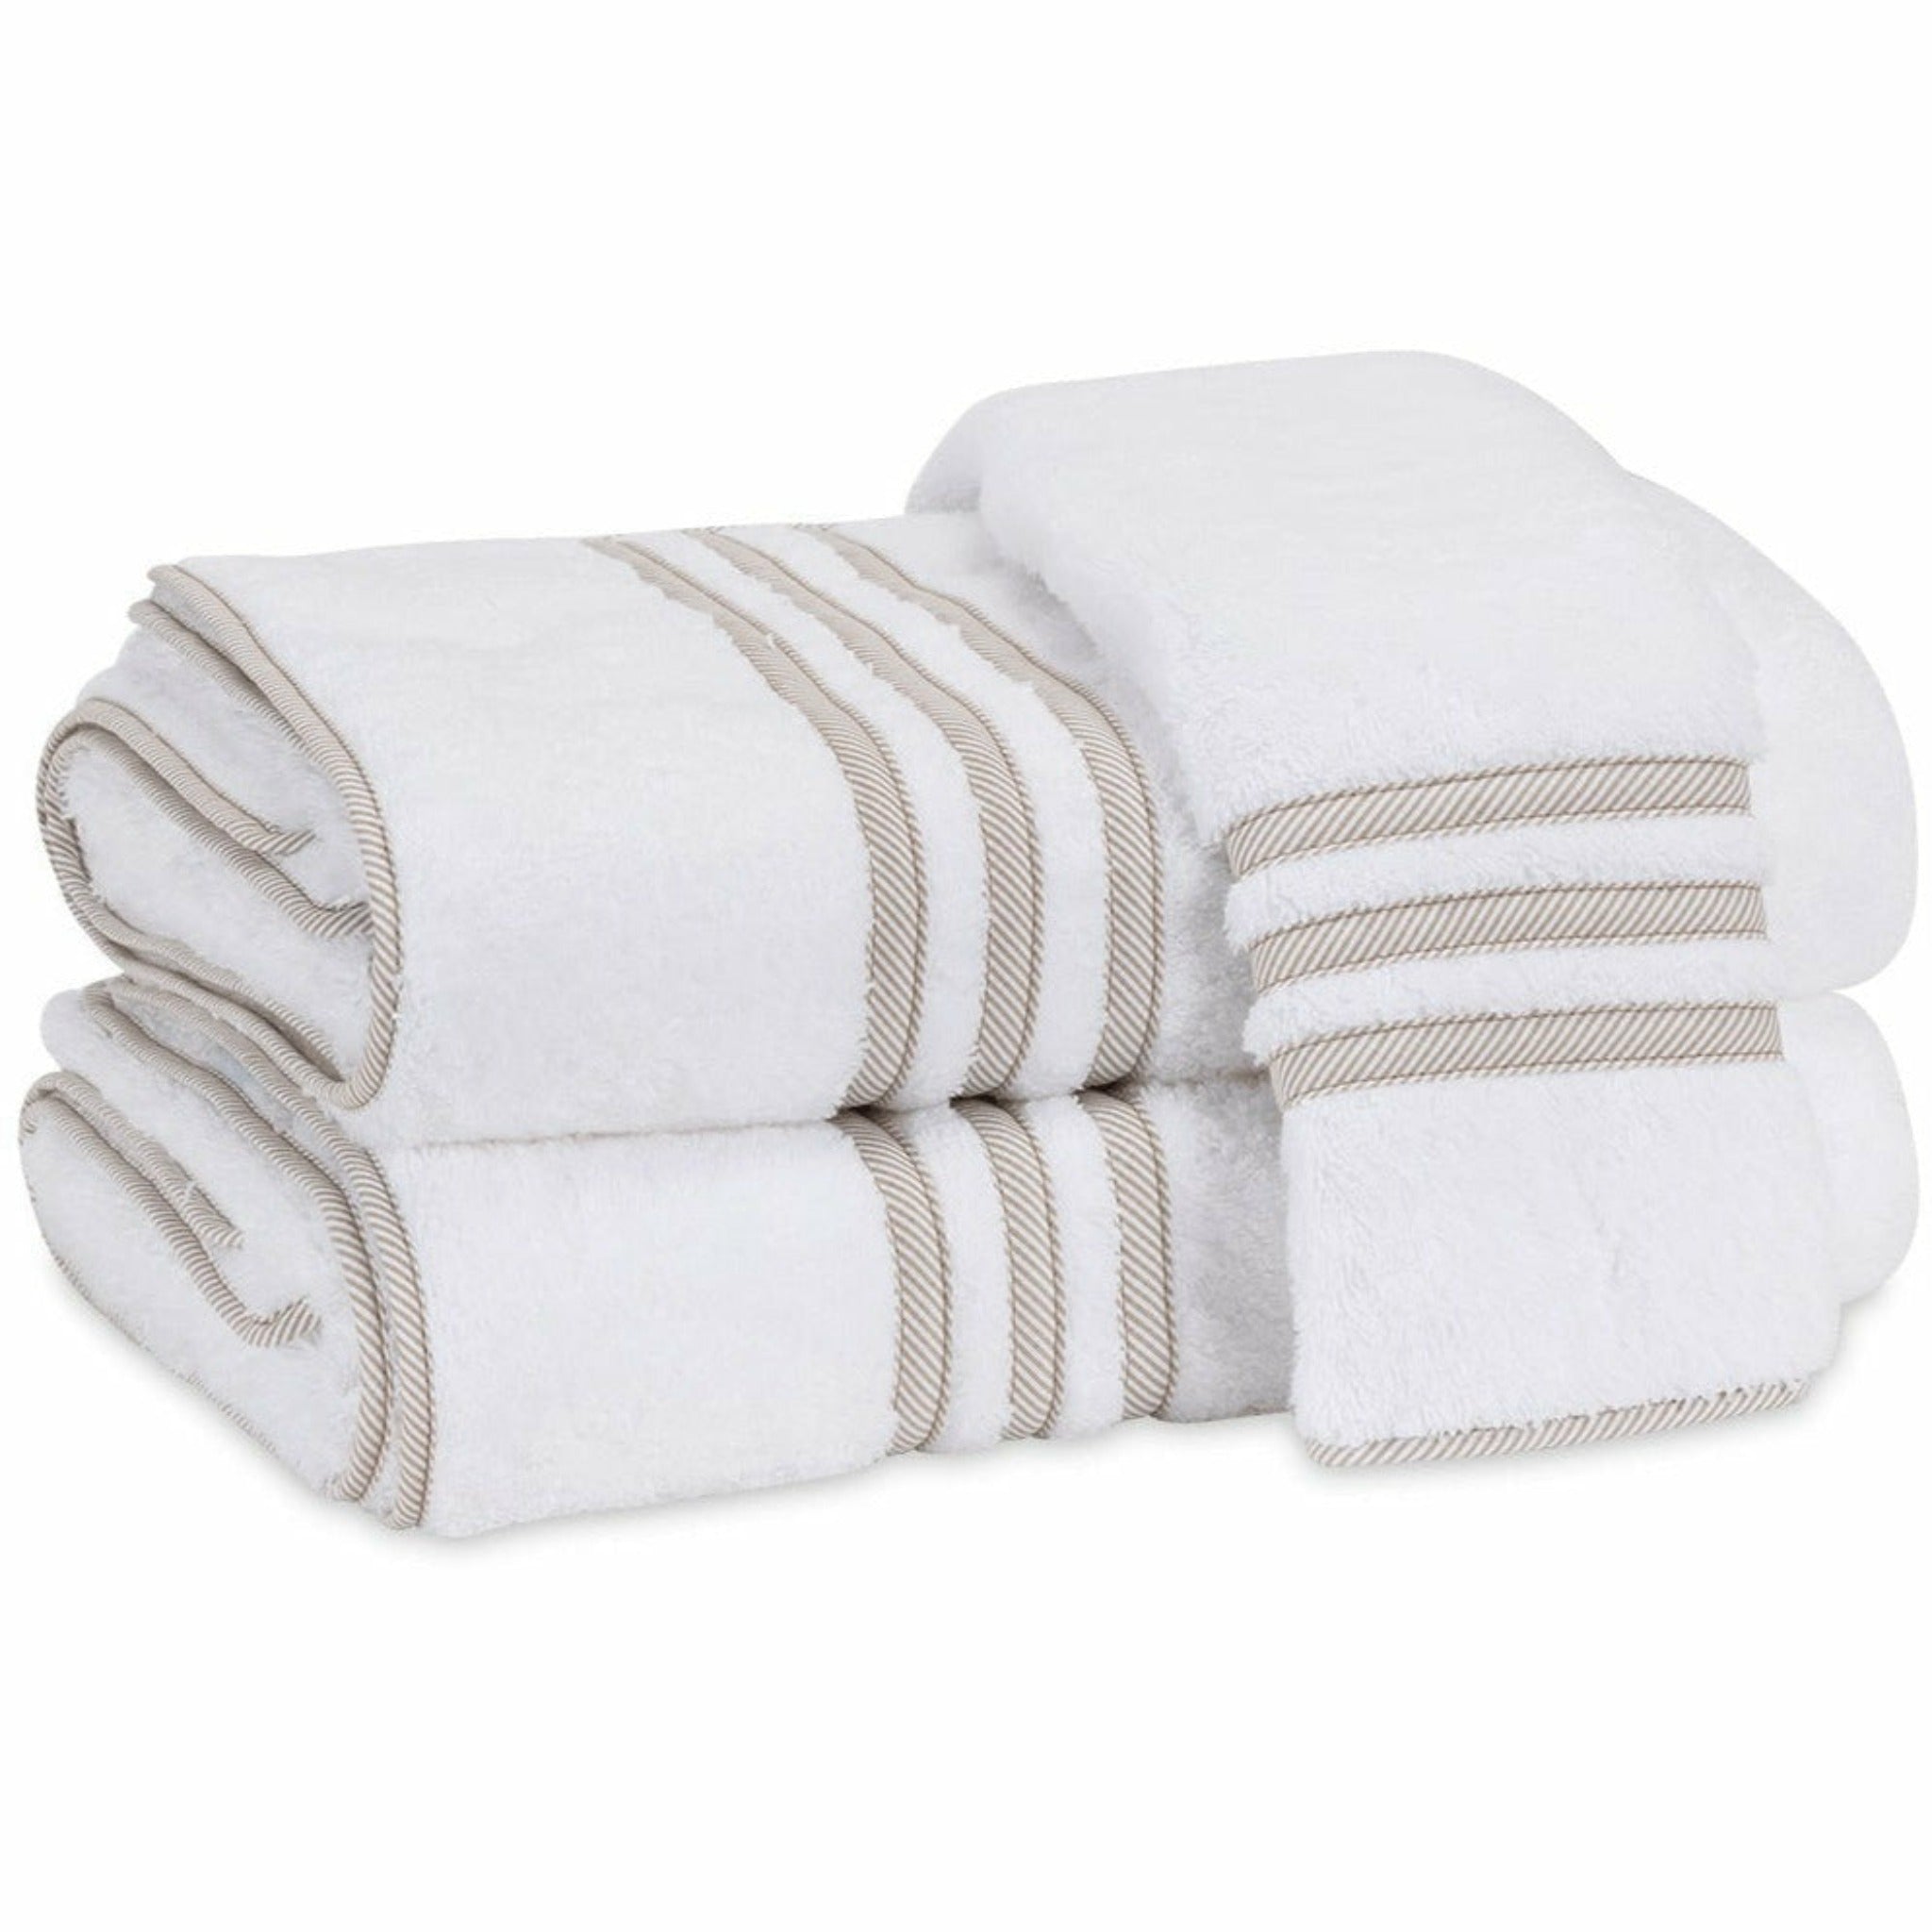 White Hotel Collection Embroidery Line Cotton Bath Towels set of 1